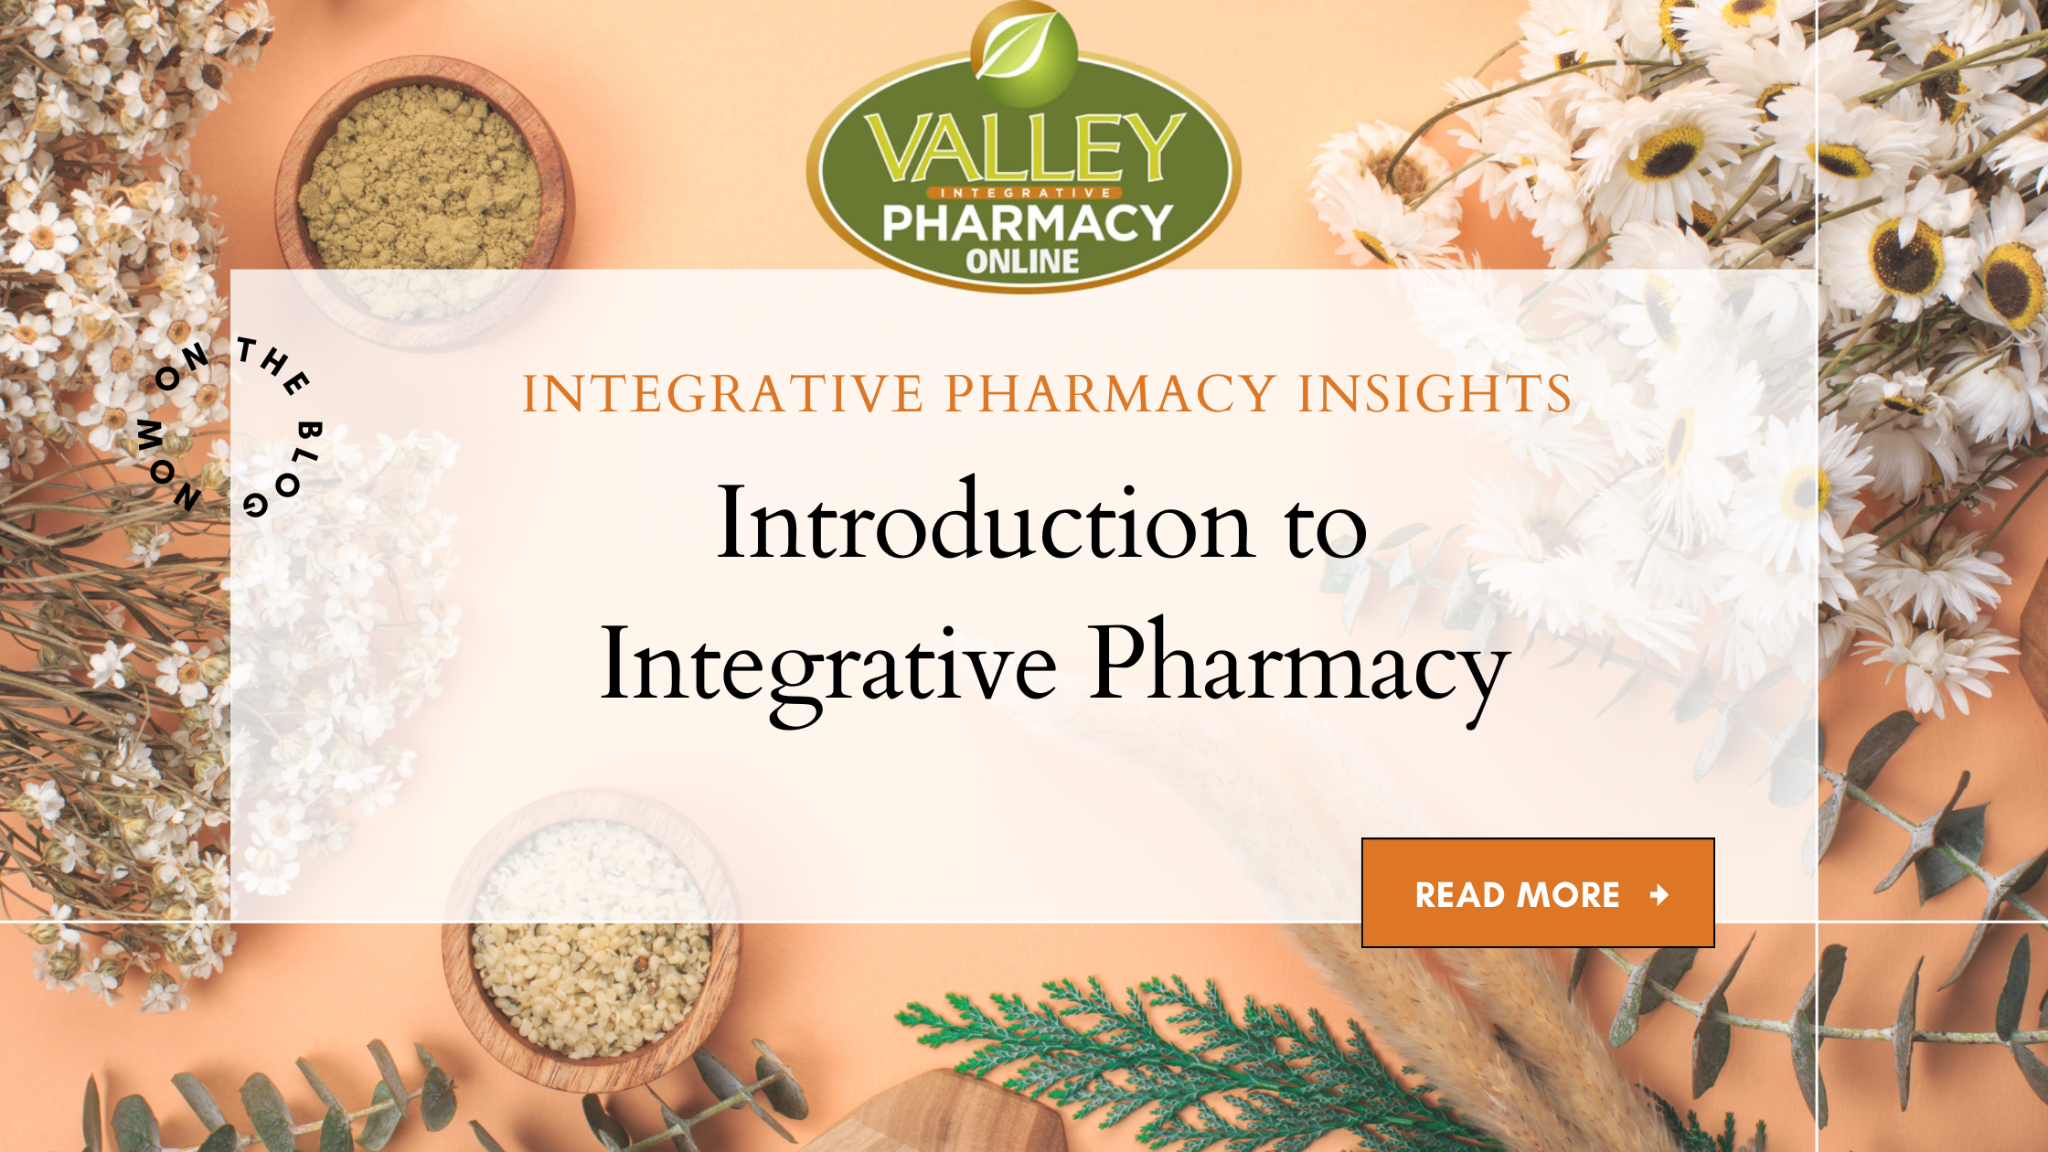 Introduction to Integrative Pharmacy